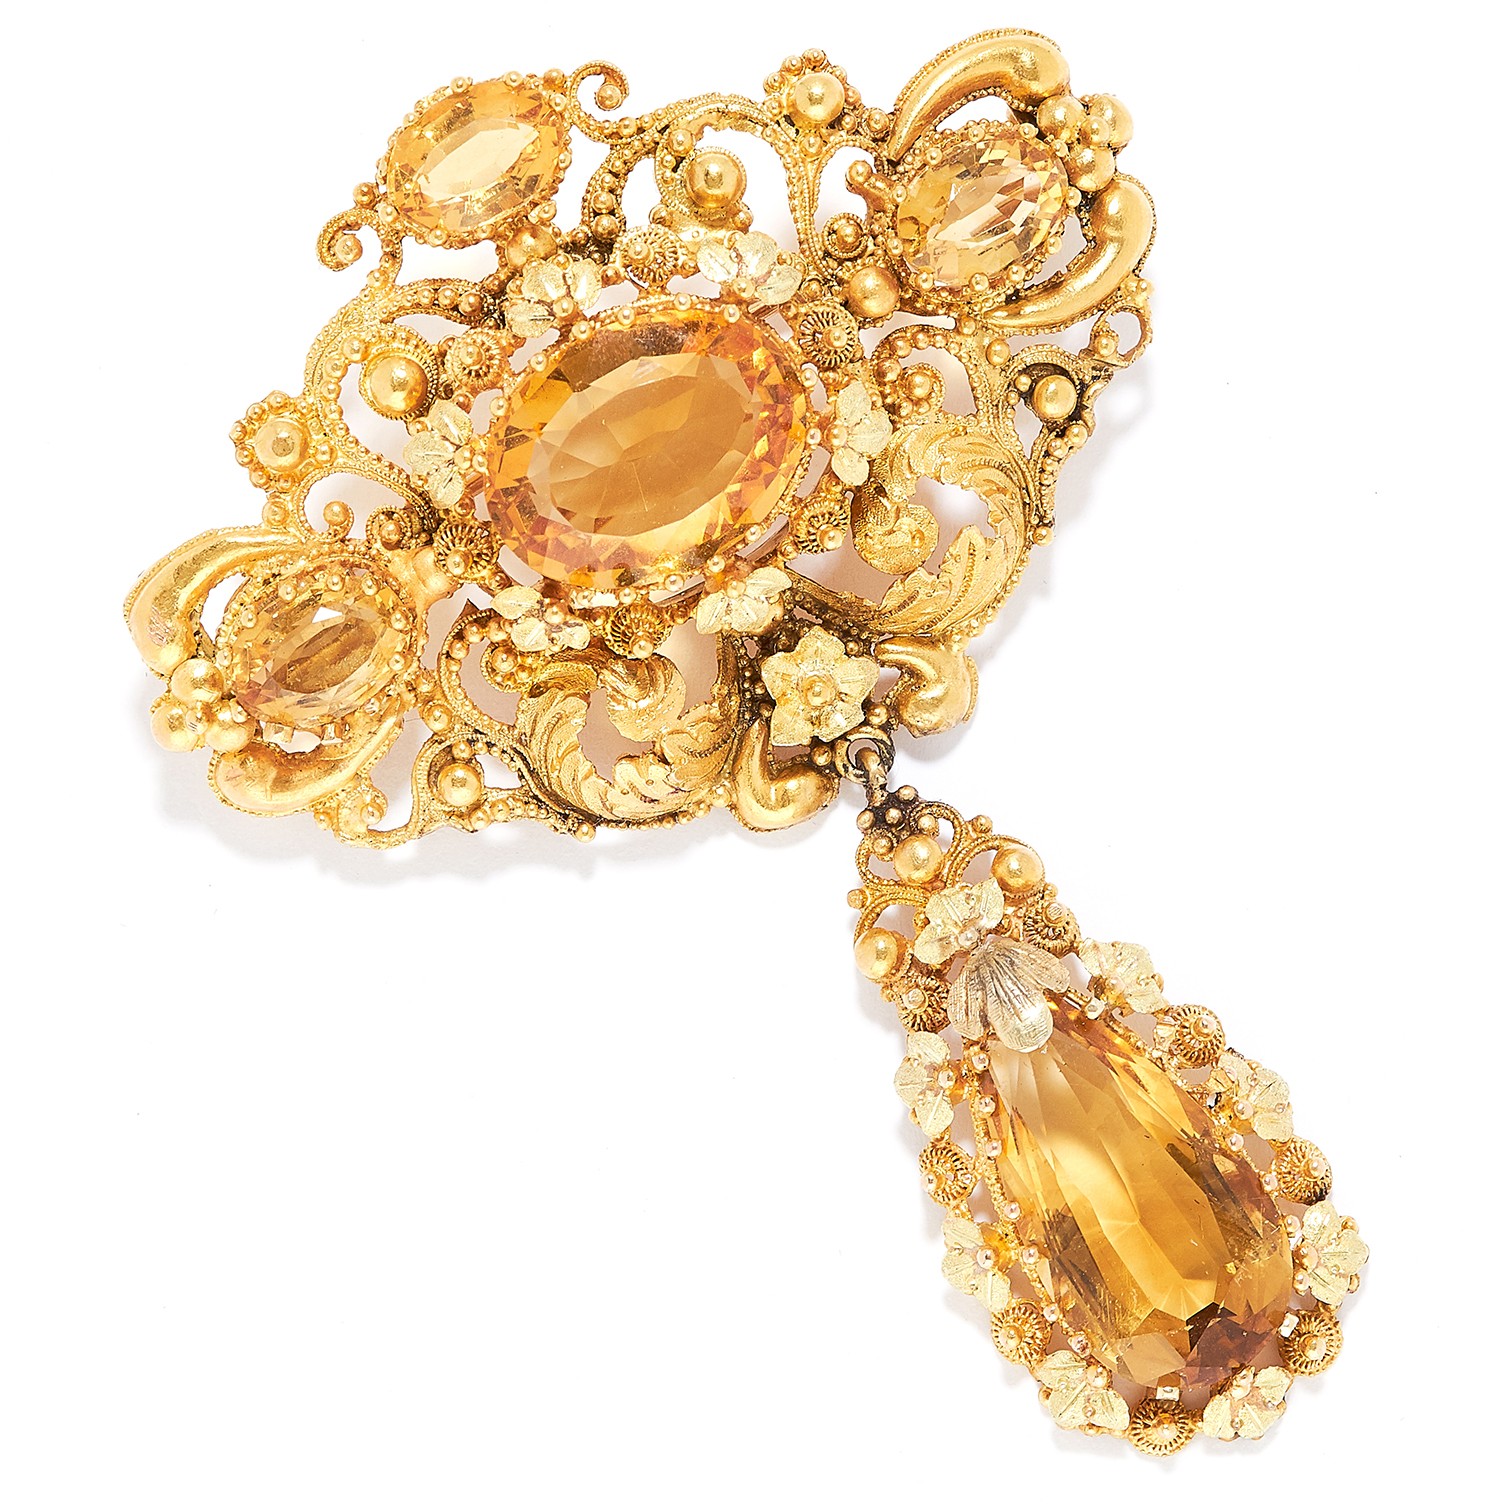 ANTIQUE CITRINE BROOCH, 19TH CENTURY in high carat yellow gold, set with four oval cut citrines,